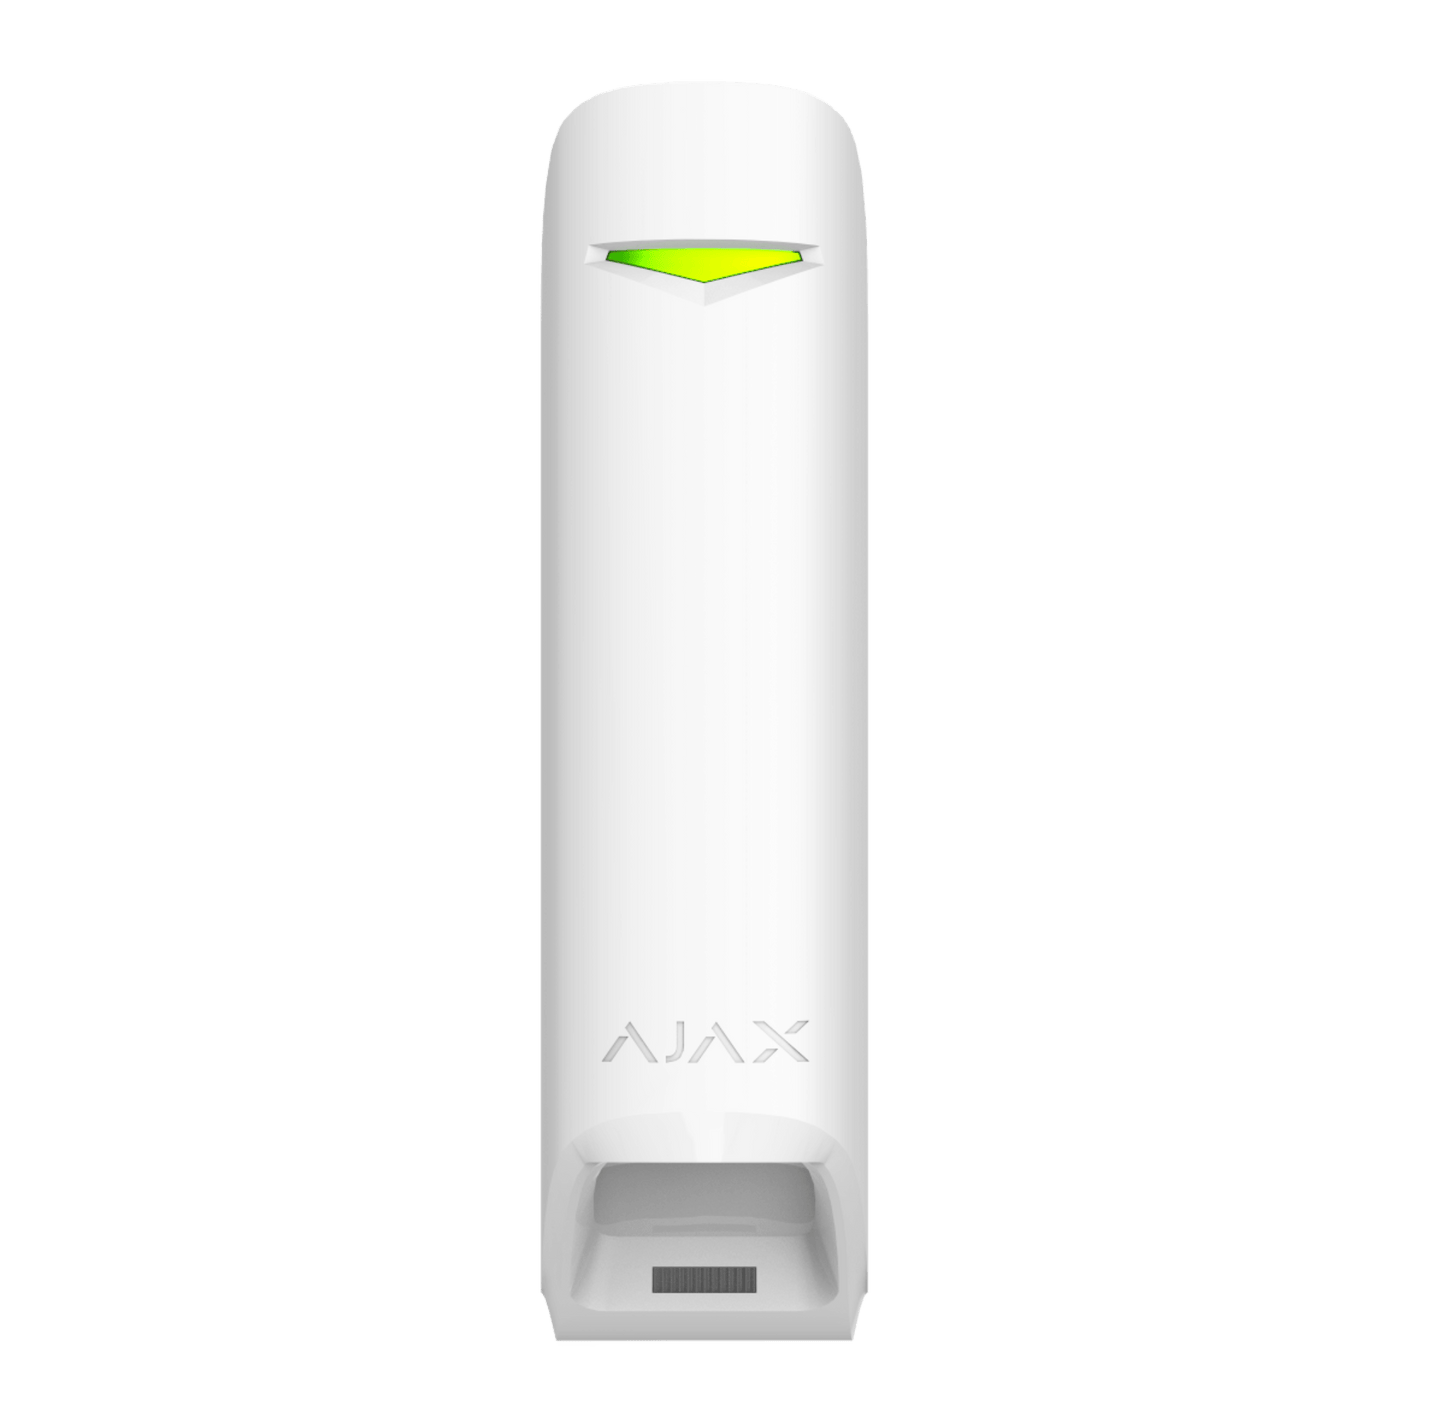 White Ajax MotionProtect Curtain detector a wireless motion detector for business and home security,  134 × 44 × 34 mm in size , 118grams in weight, Front view of device